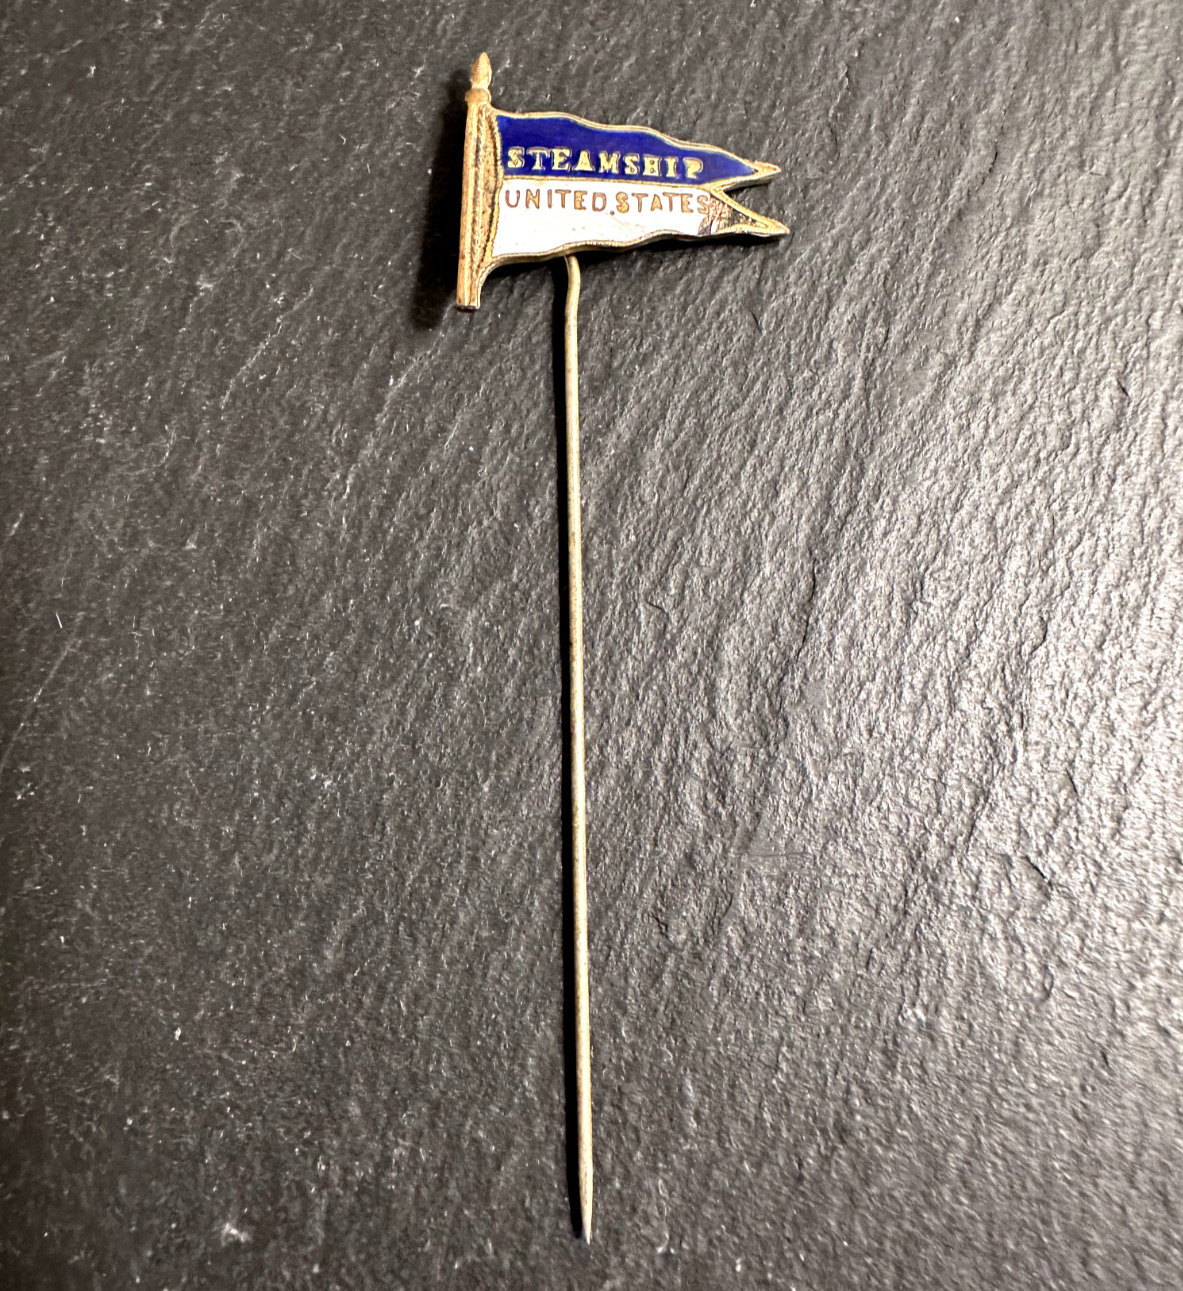 RARE VINTAGE SS UNITED STATES STEAMSHIP UNITED STATES STICK PIN D219